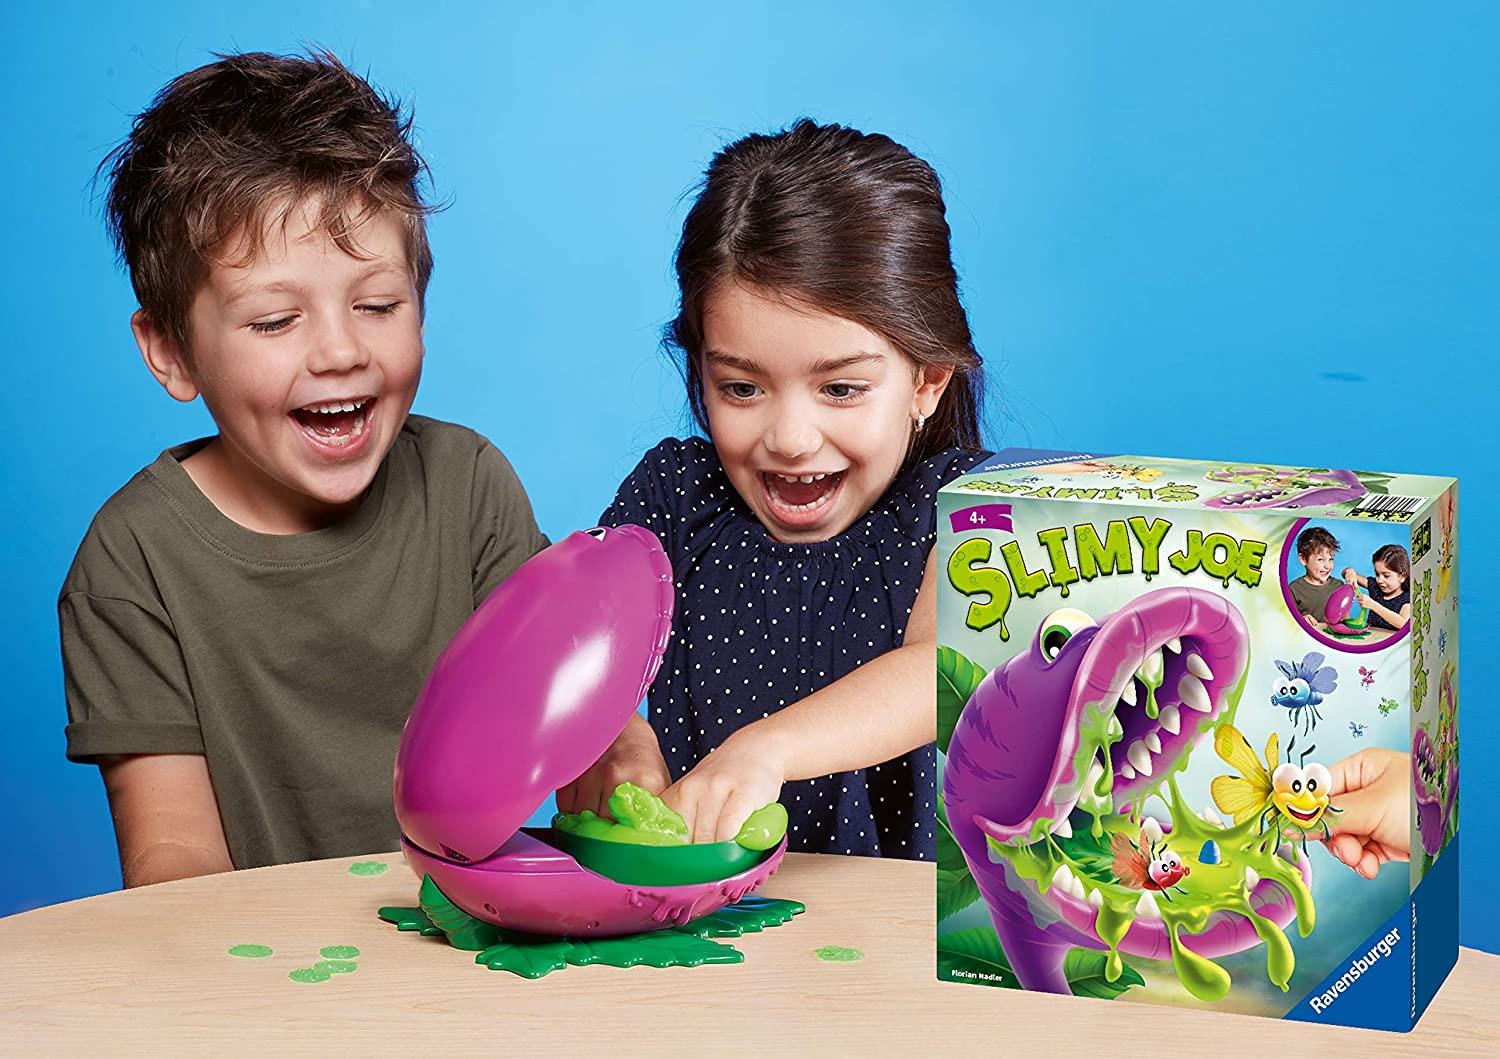 Ravensburger Game Slimy Joe Kids, Family Board Game with Slime